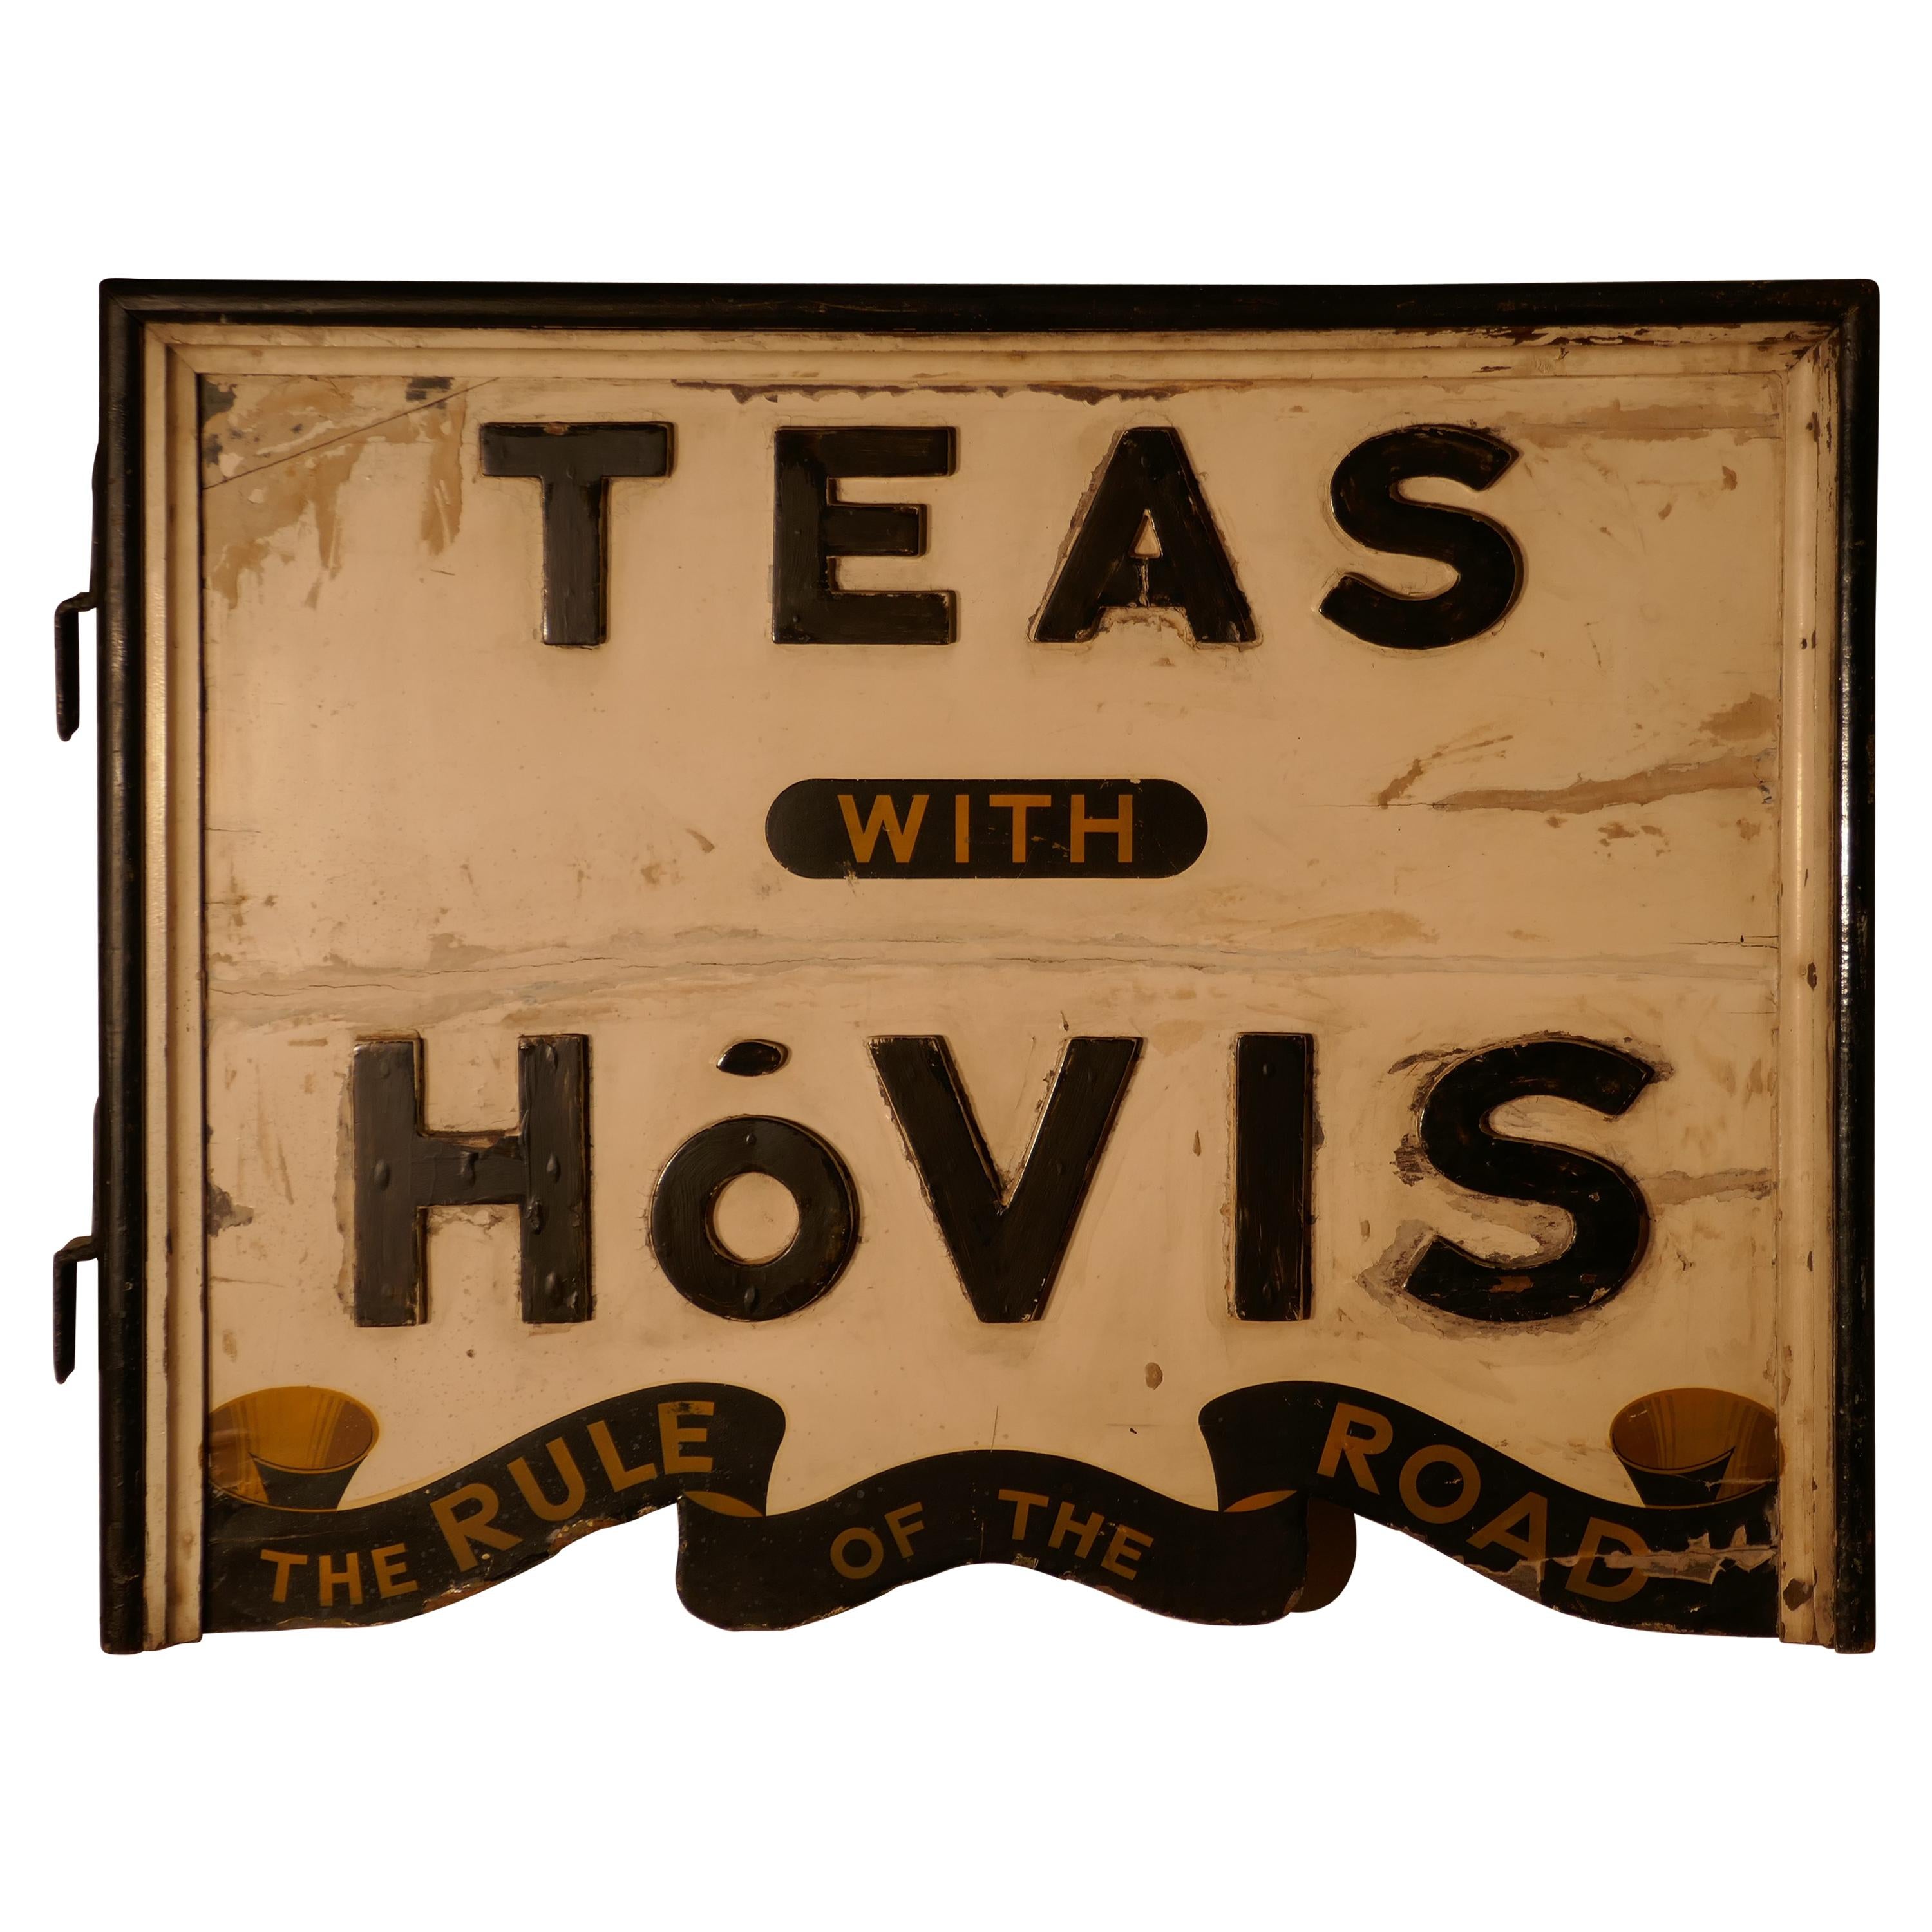 Three Dimensional Double-Sided Wooden Hovis Tea Shop Sign